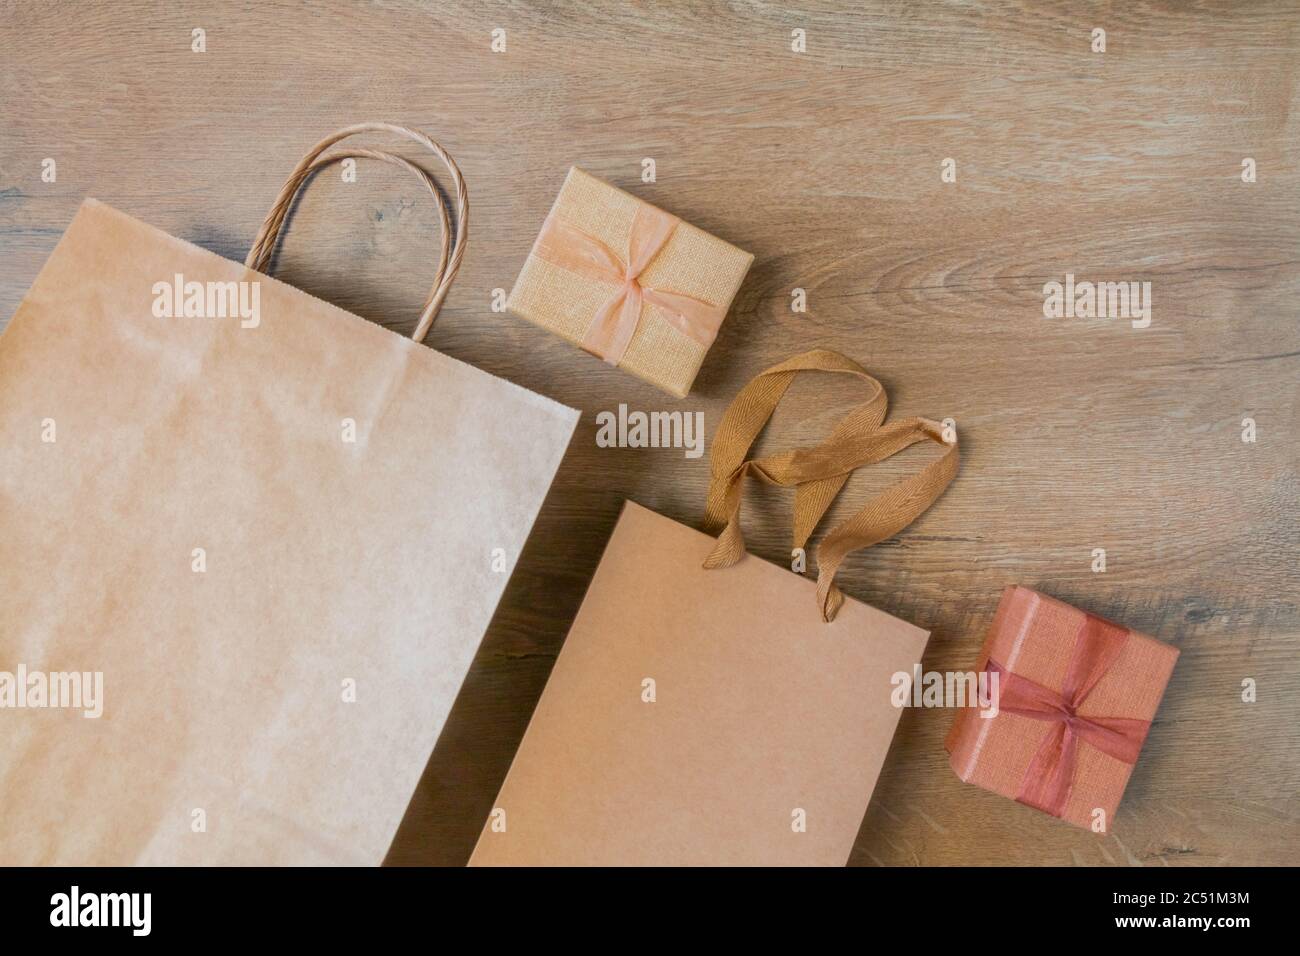 Craft paper bags and cardboard blank boxes presented on rustic wooden background. Unlabeled cardboard packages boxes and bags on wood table. Top view Stock Photo